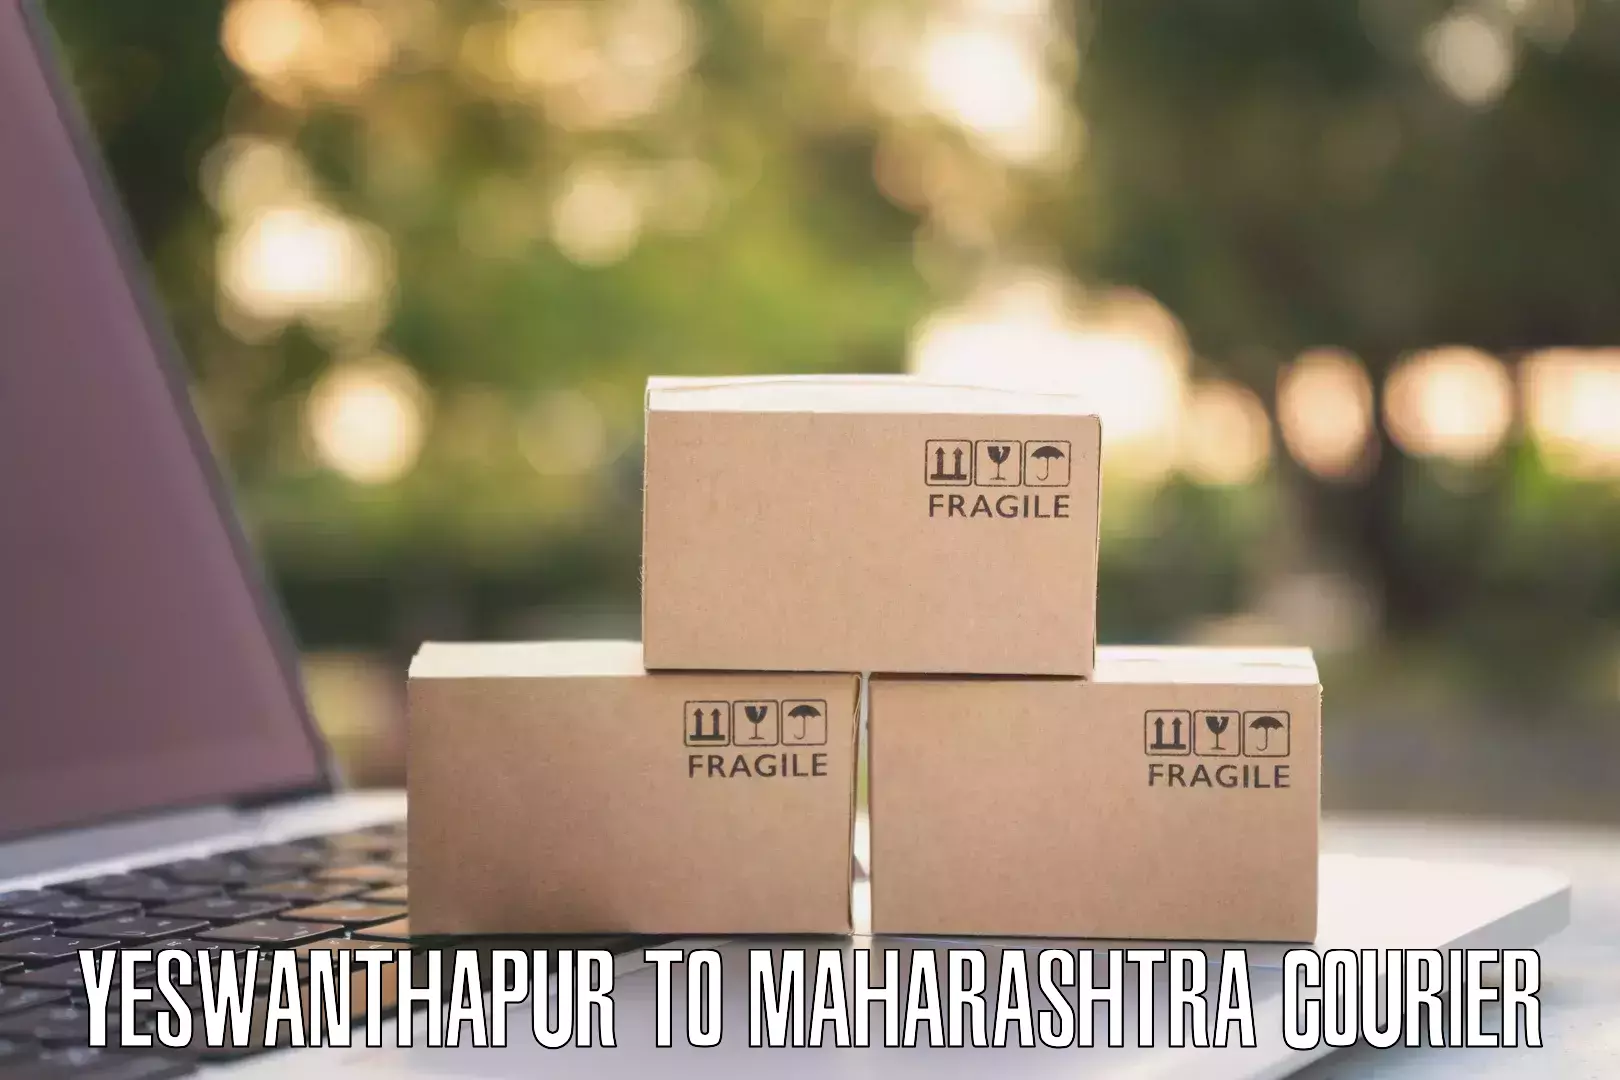 Automated shipping Yeswanthapur to Mhaswad